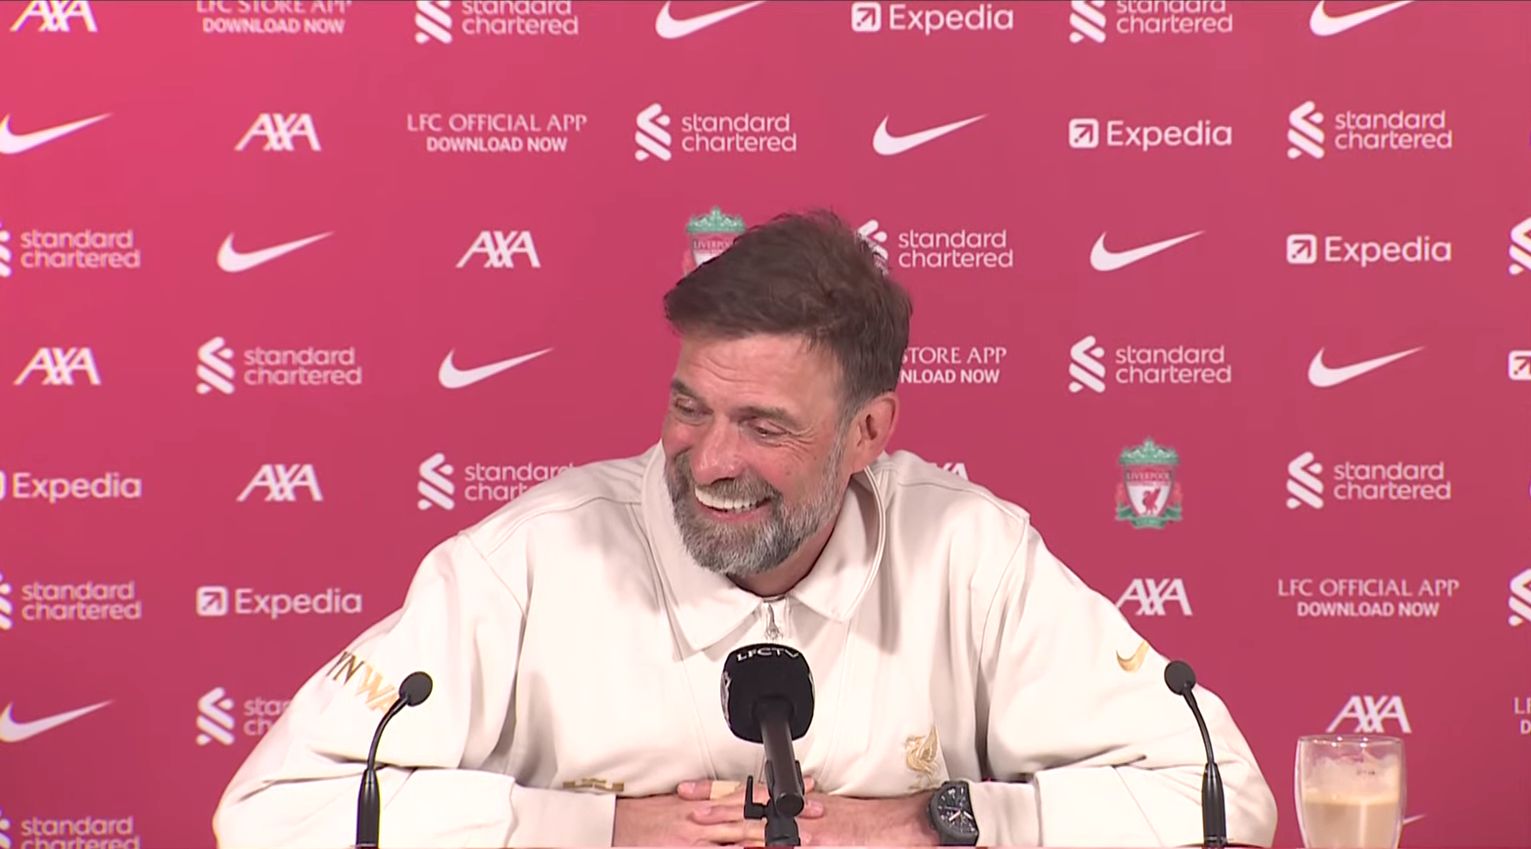 Klopp’s six-word presser opener after arriving late will have fans in stitches